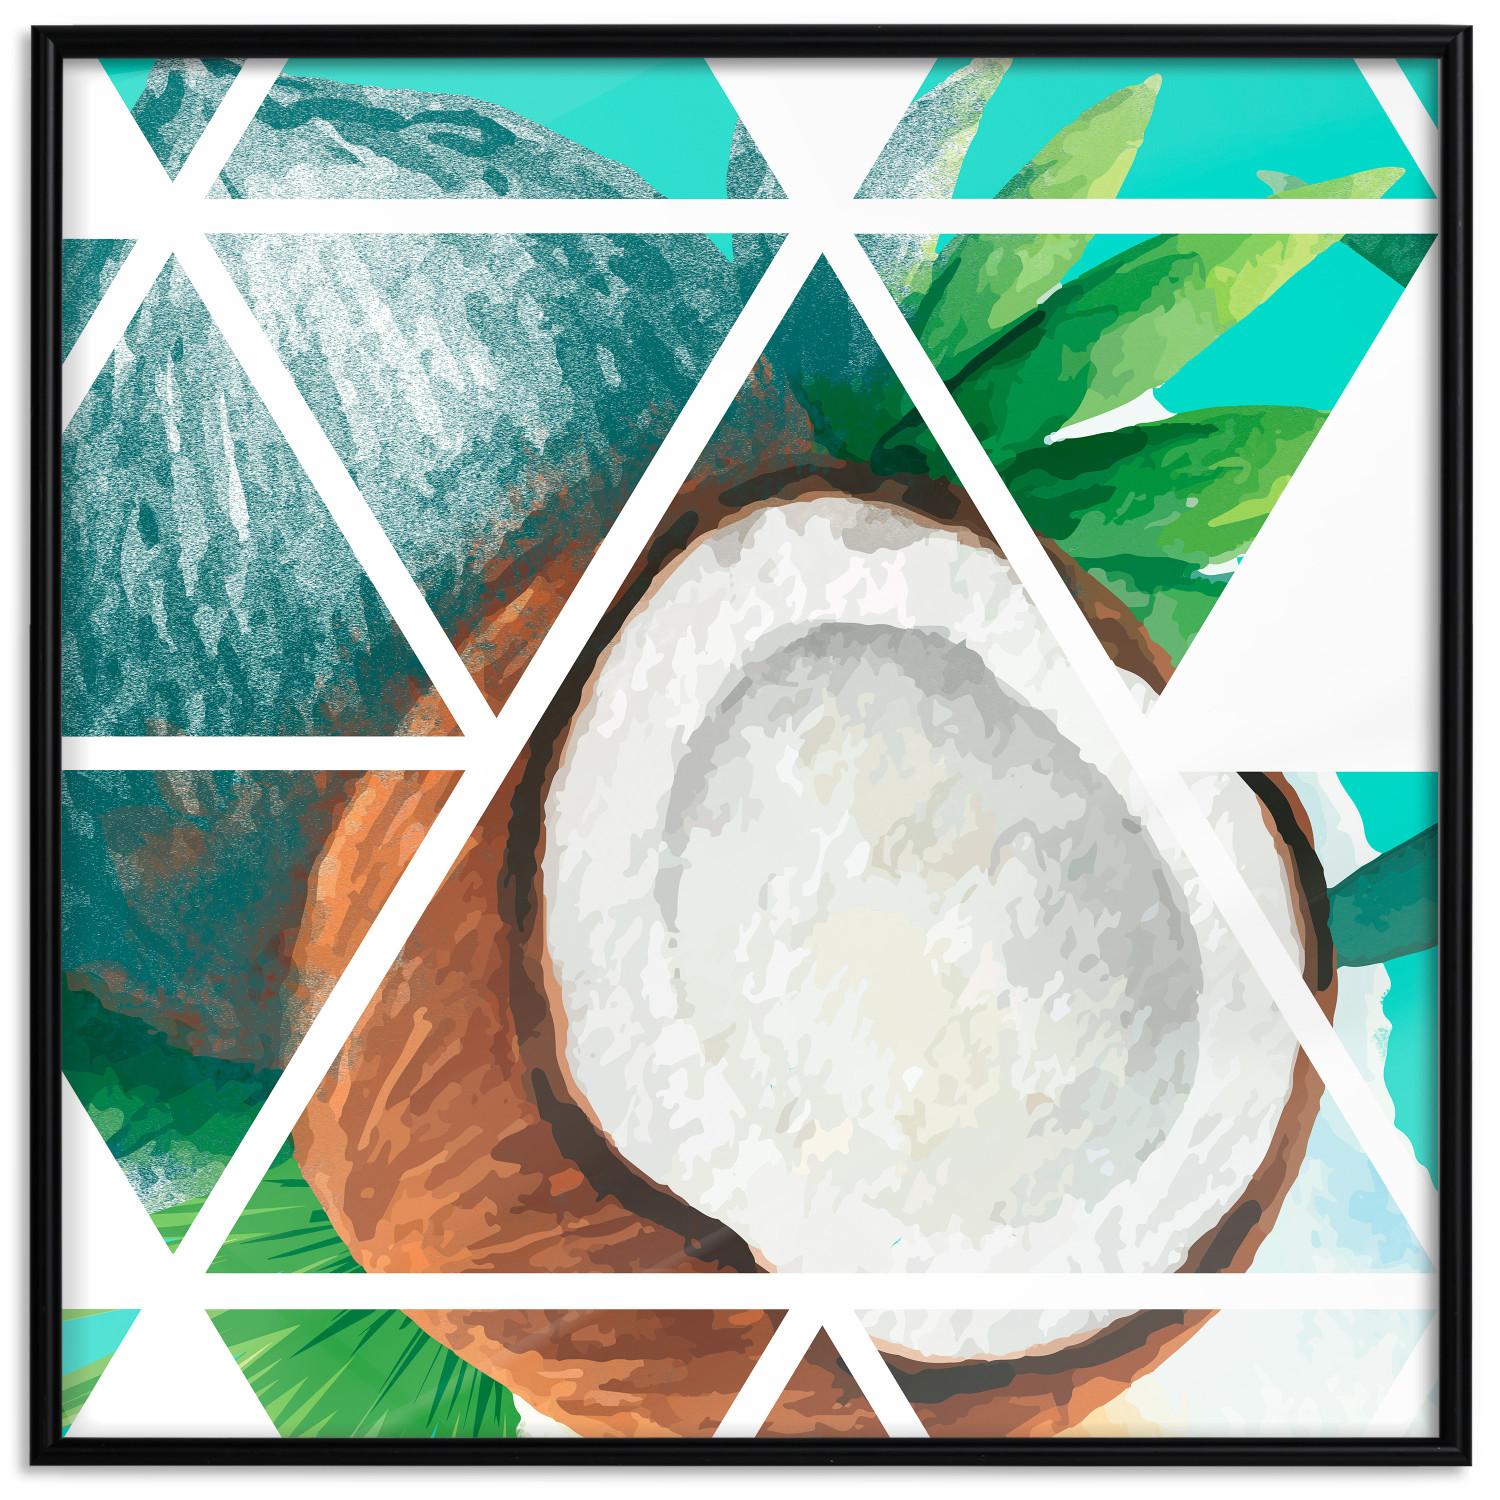 Gallery wall Coconut (Square) - geometric abstraction with a tropical fruit